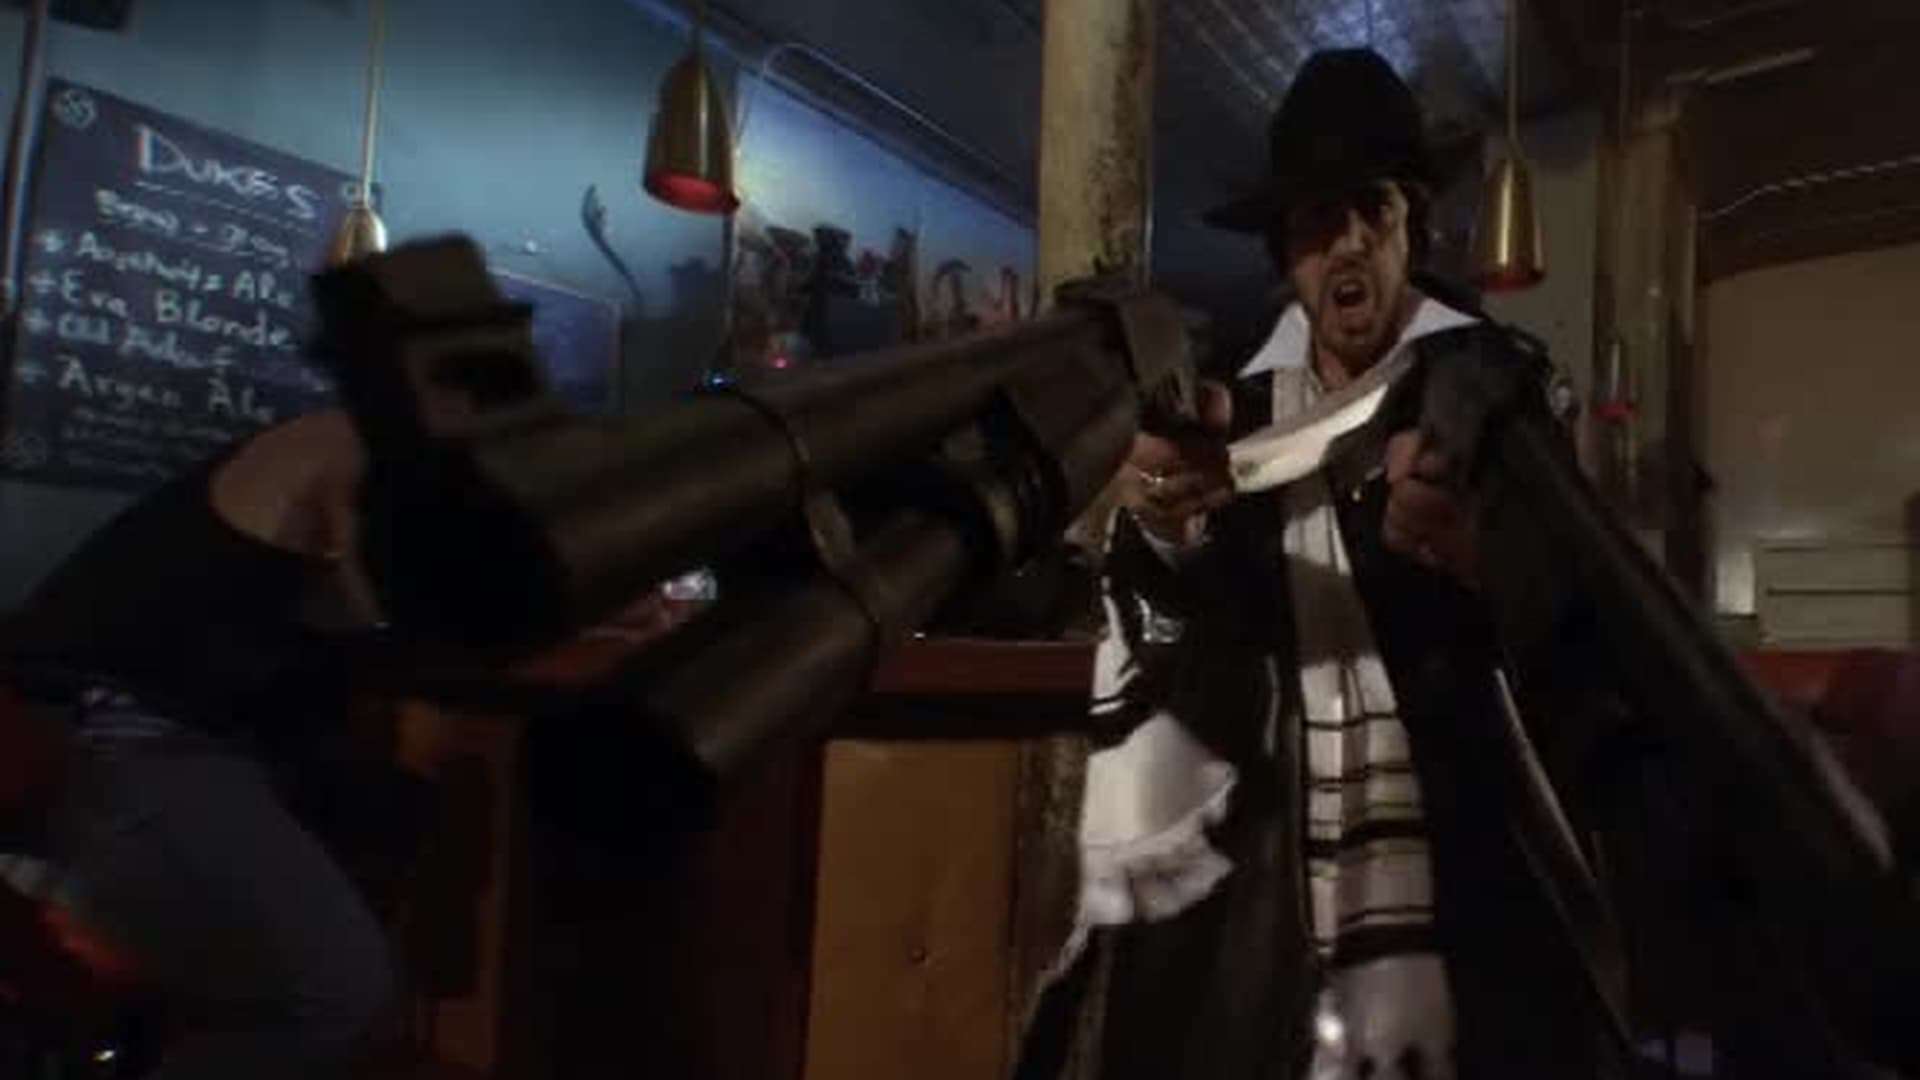 A man dressed in religious garb points a machine gun in this photo from Intrinsic Value Films.